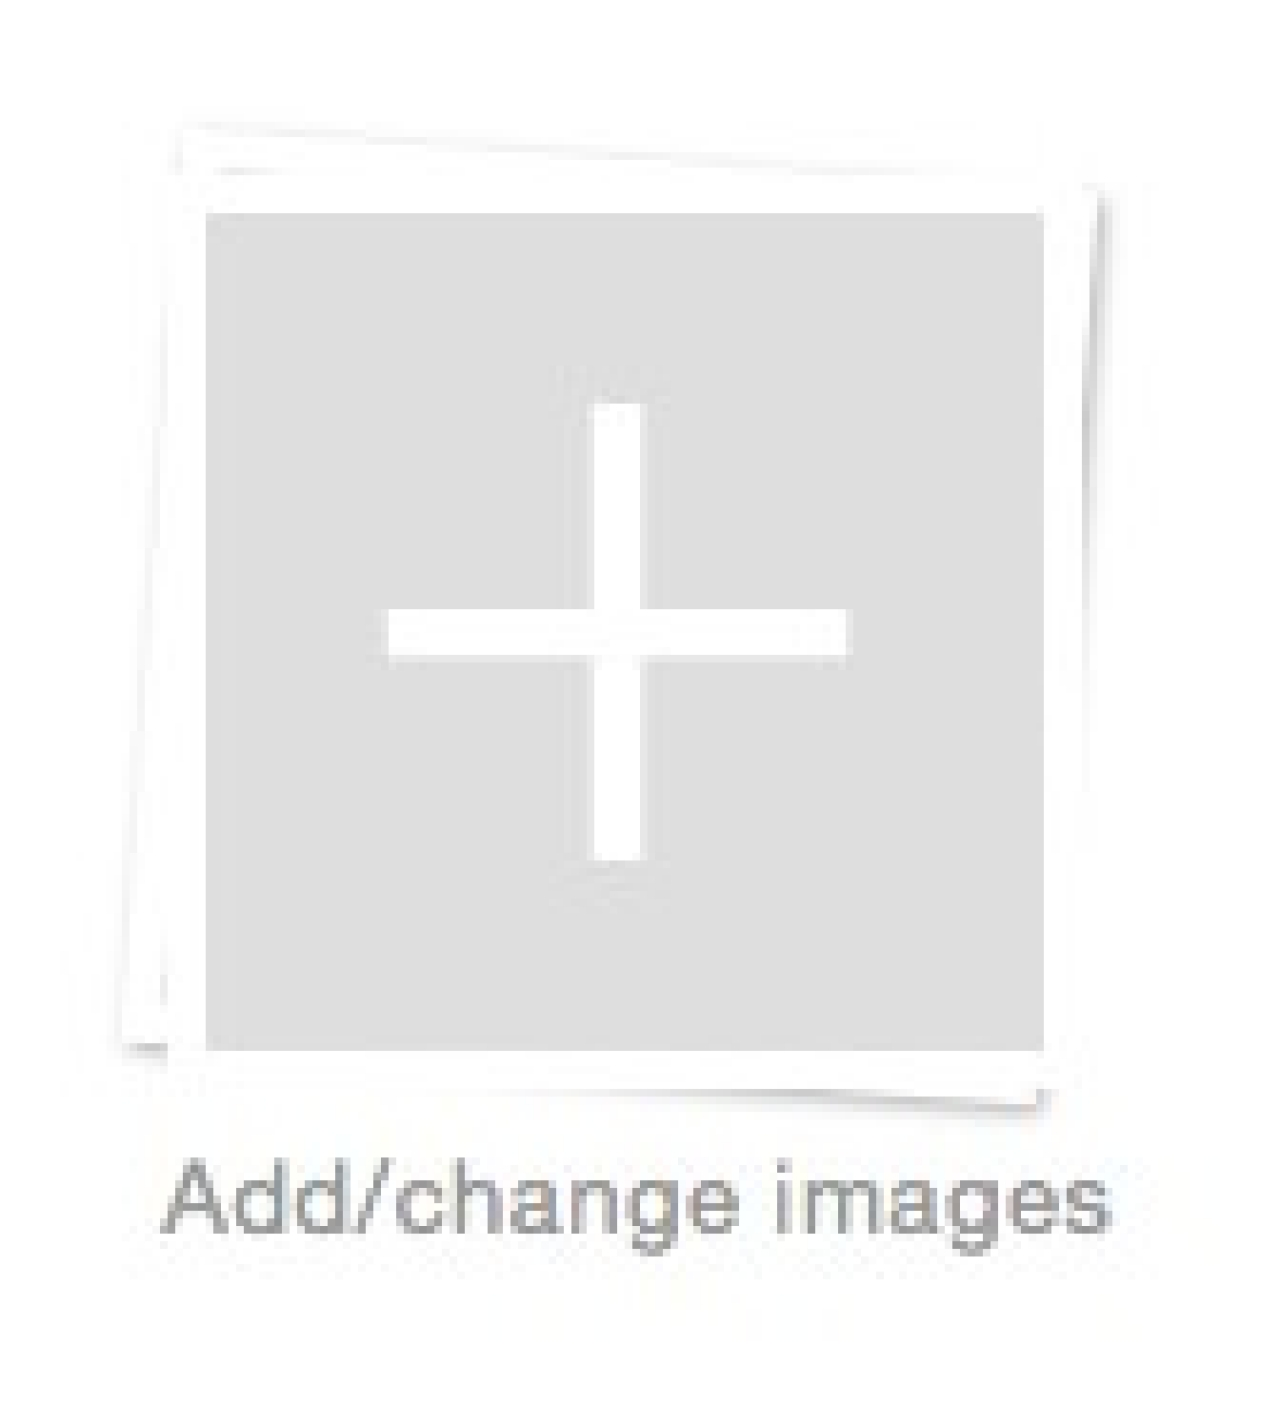 add/change images